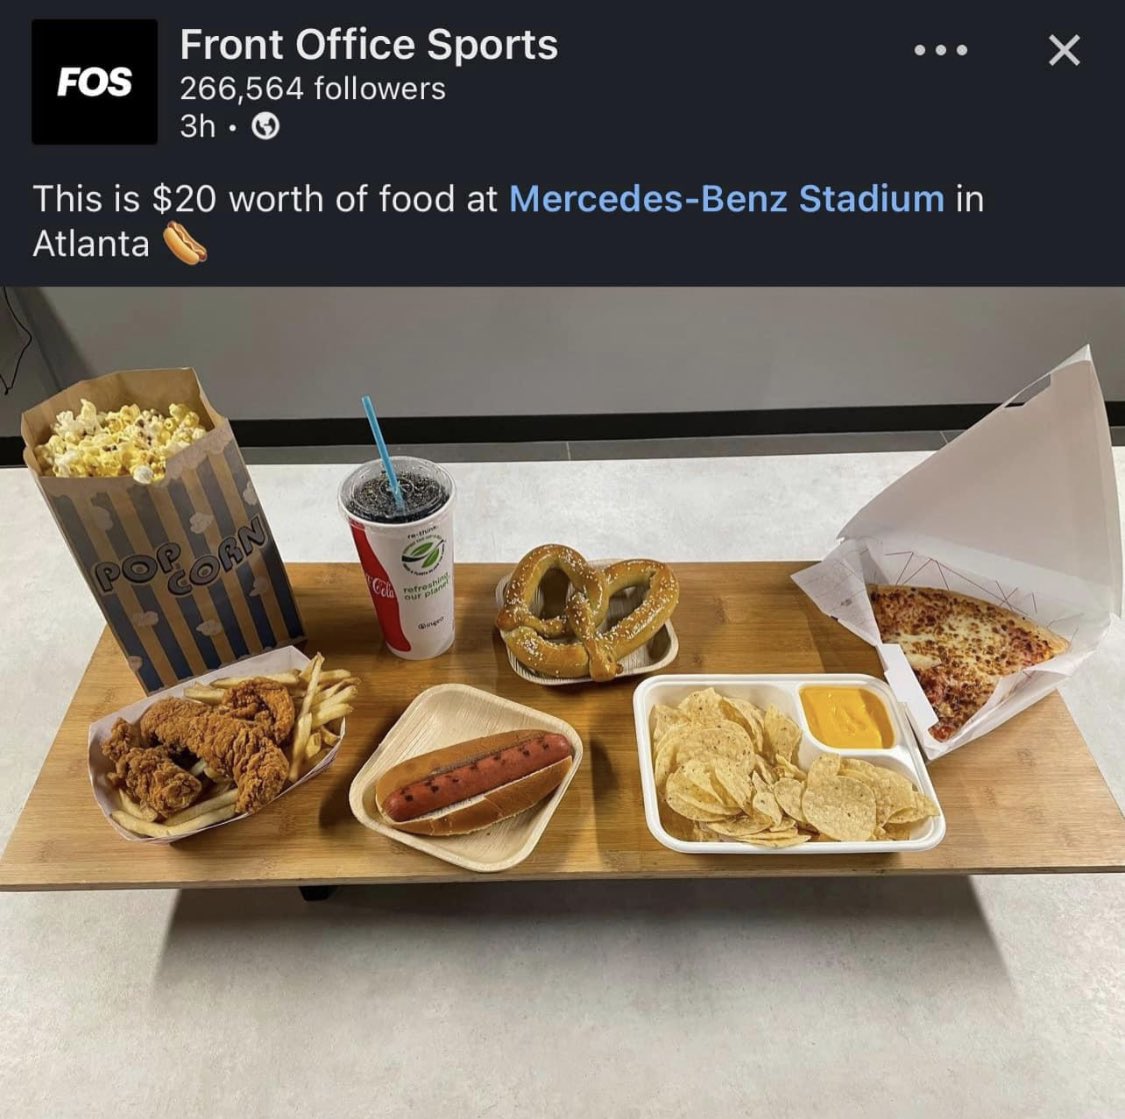 How it should be. #sports #stadiumfood #foodcost #cheaperfood #sportsbetting